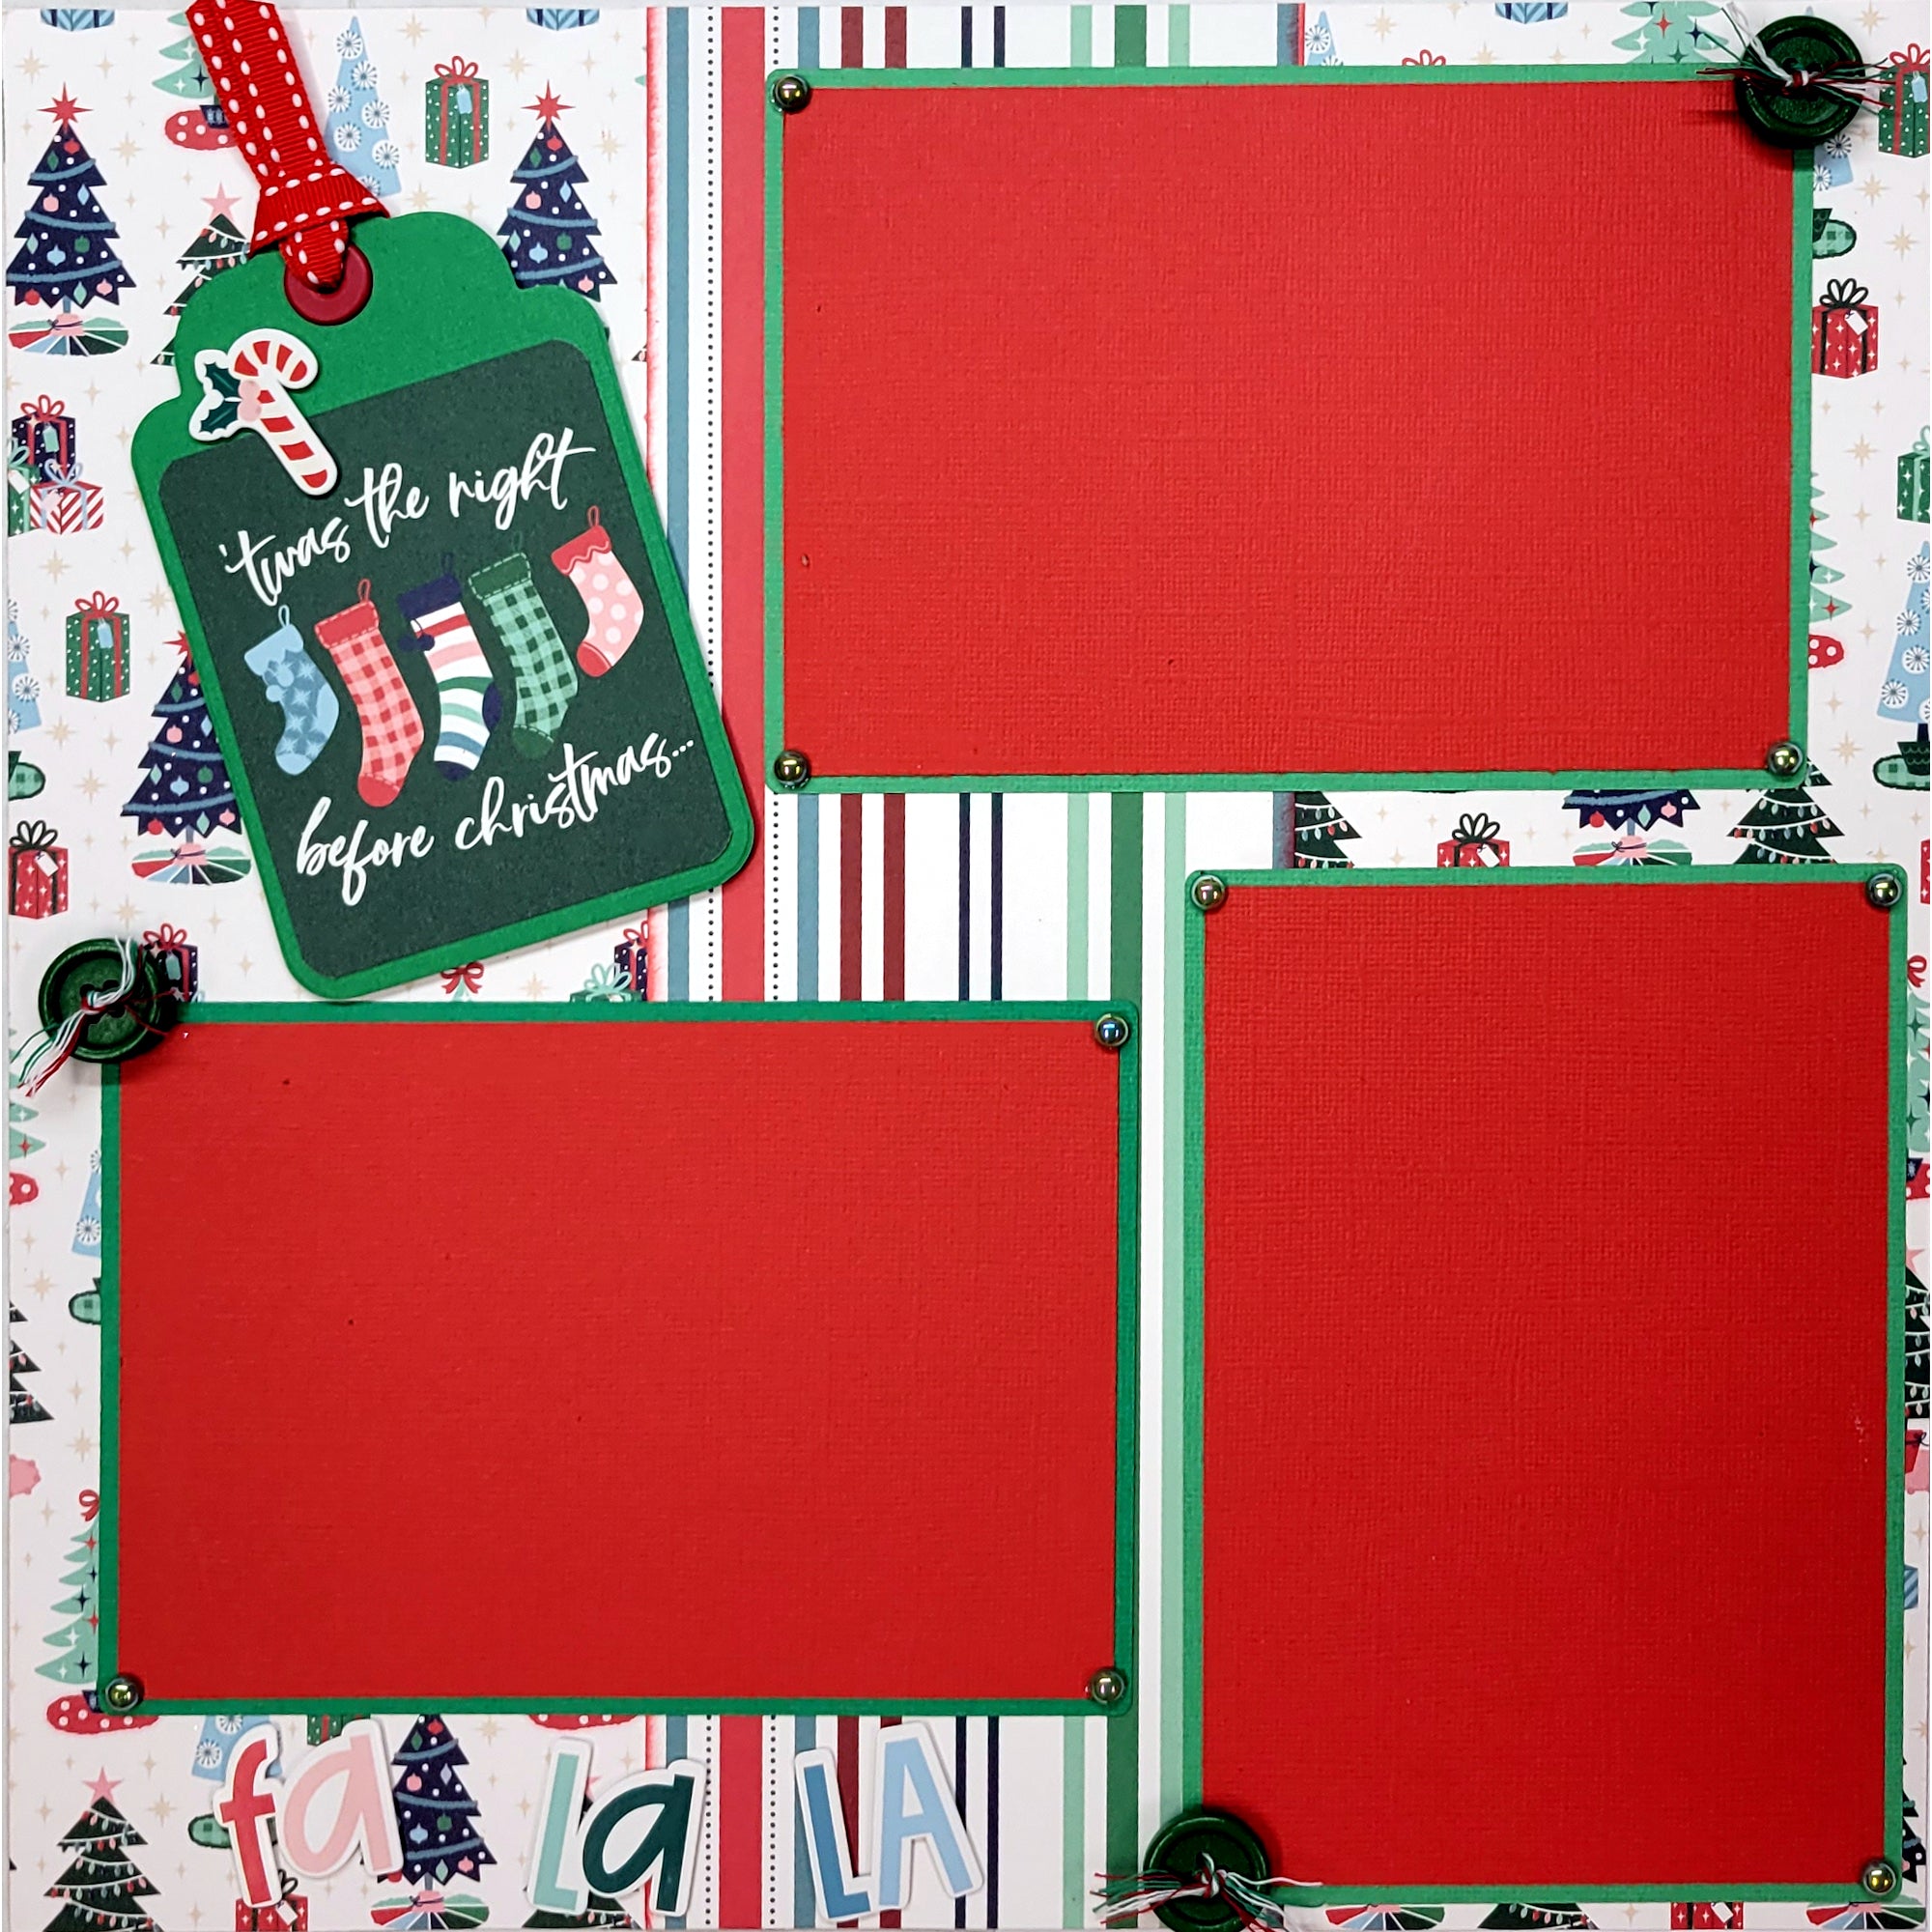 Twas The Night Before Christmas (2) - 12 x 12 Pages, Fully-Assembled & Hand-Crafted 3D Scrapbook Premade by SSC Designs